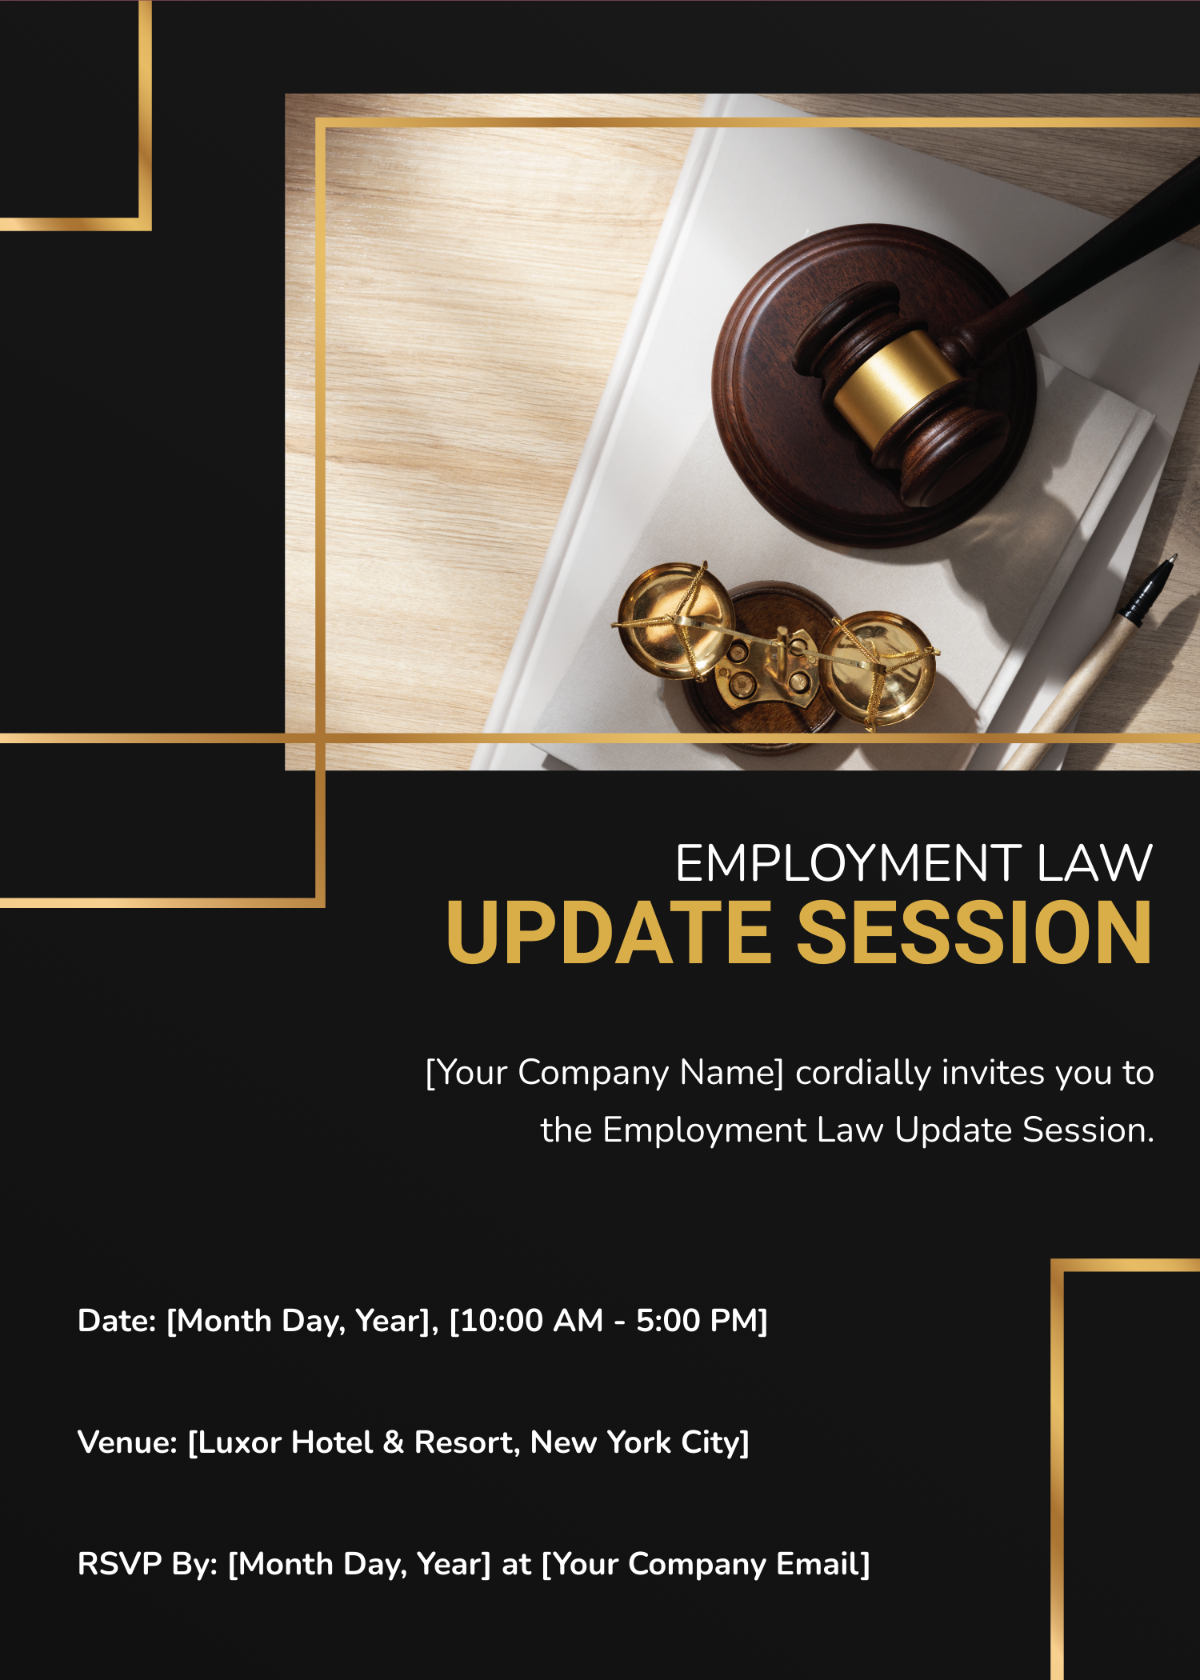 Employment Law Update Session Invitation Card